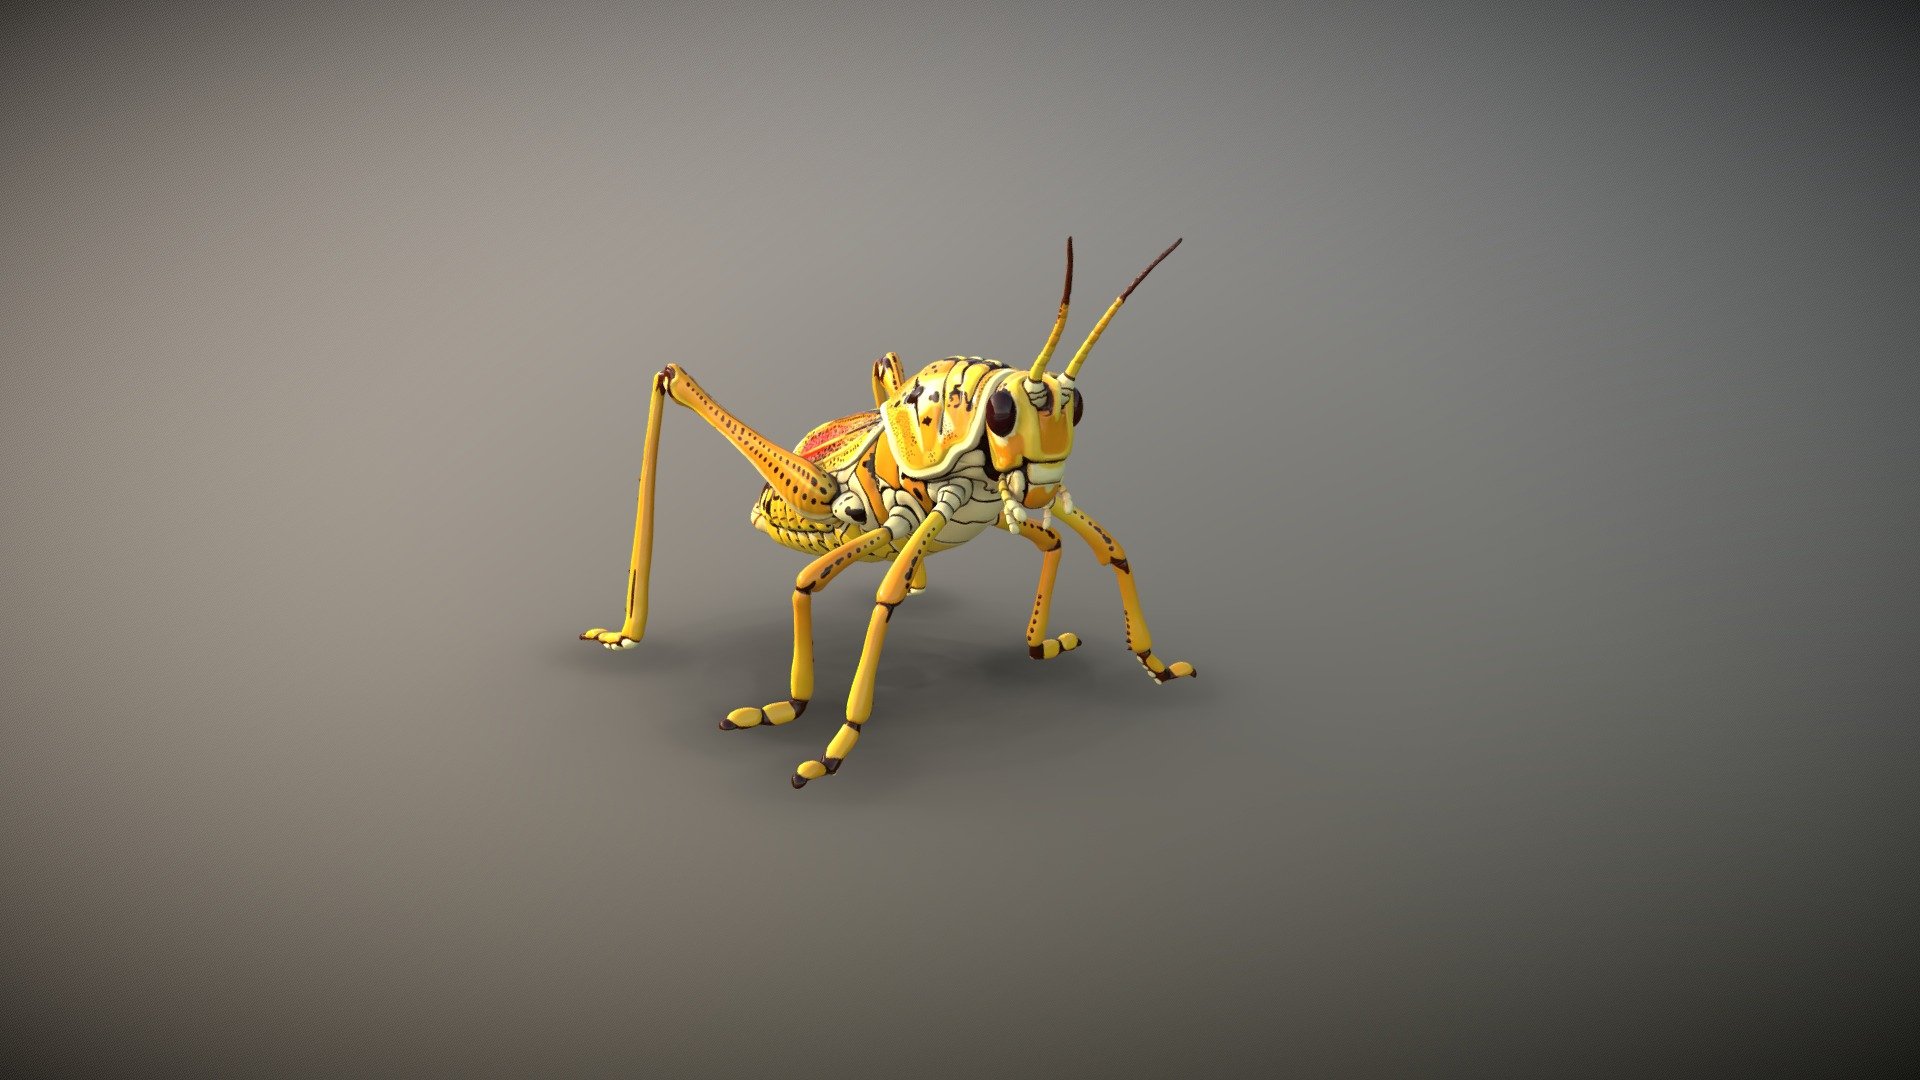 A Lubber Grasshopper sculpted in ZBrush and hand painted using 3D Coat.
Lubber Grasshoppers are one of the largest and slowest moving grasshoppers. They can get as big as 3 inches in length when they are mature. The adults are yellow and black. A garden pest in the United States of America. Aparently they really like to eat Orchids.

Textures include: diffuse; normalmap; roughness (4096 x 4096 png format)
Mesh file format: .obj
Mesh optimised for real-time rendering uses 3d model